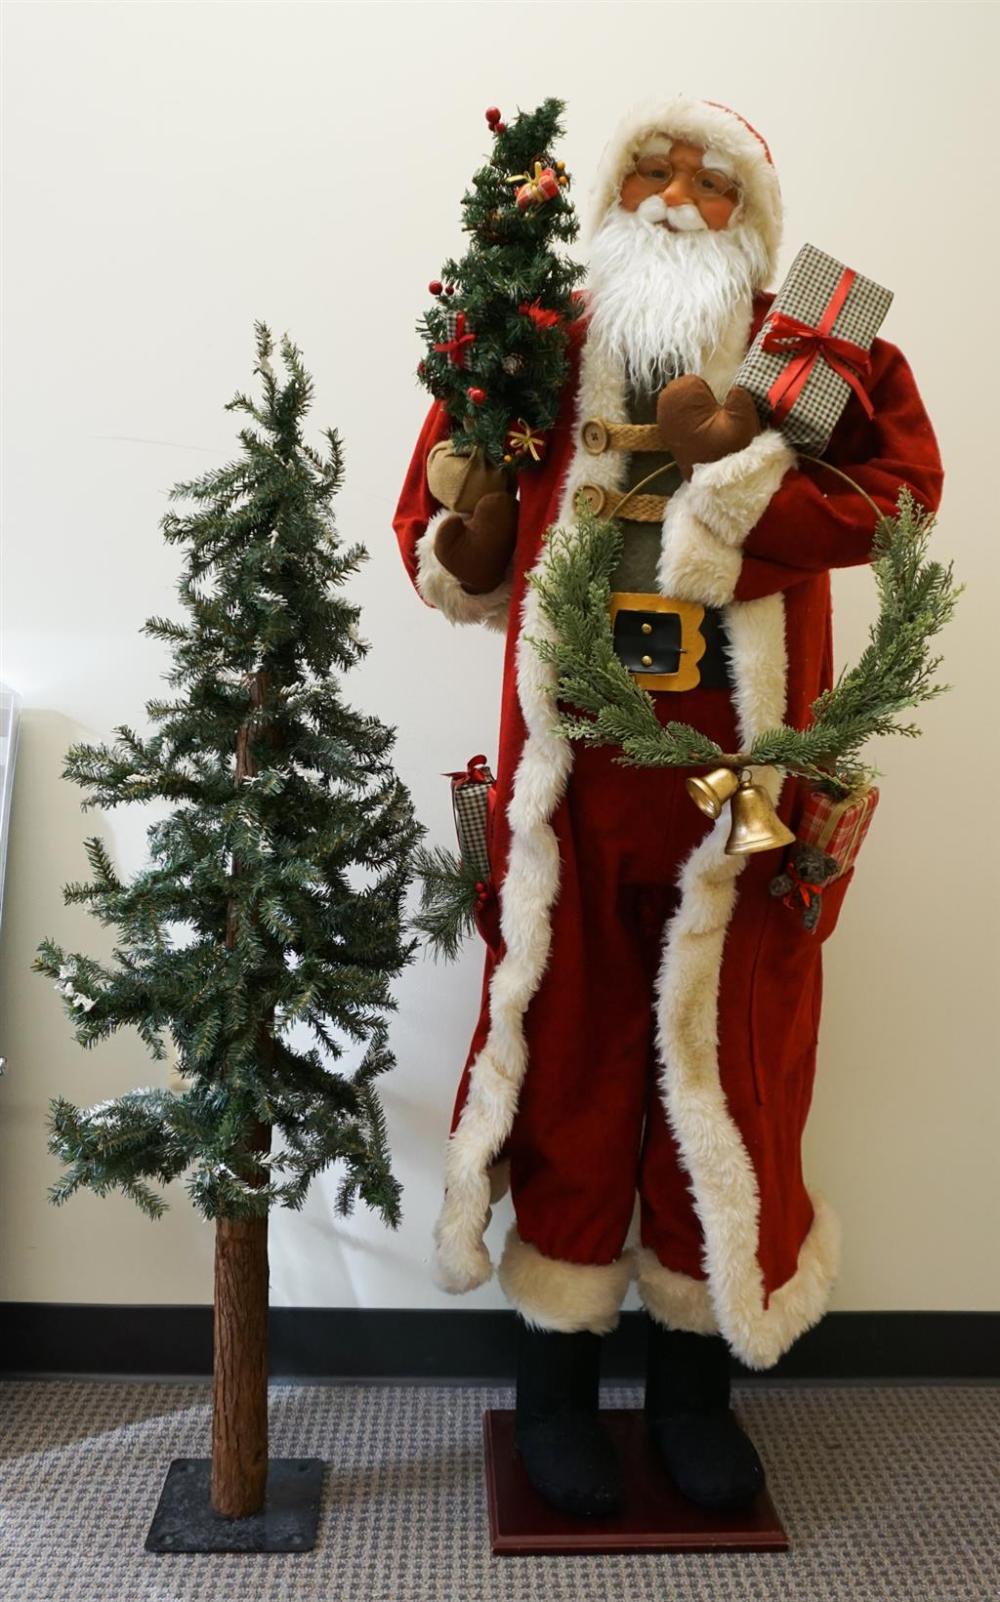 SANTA CLAUSE WITH A TREE, H: 5